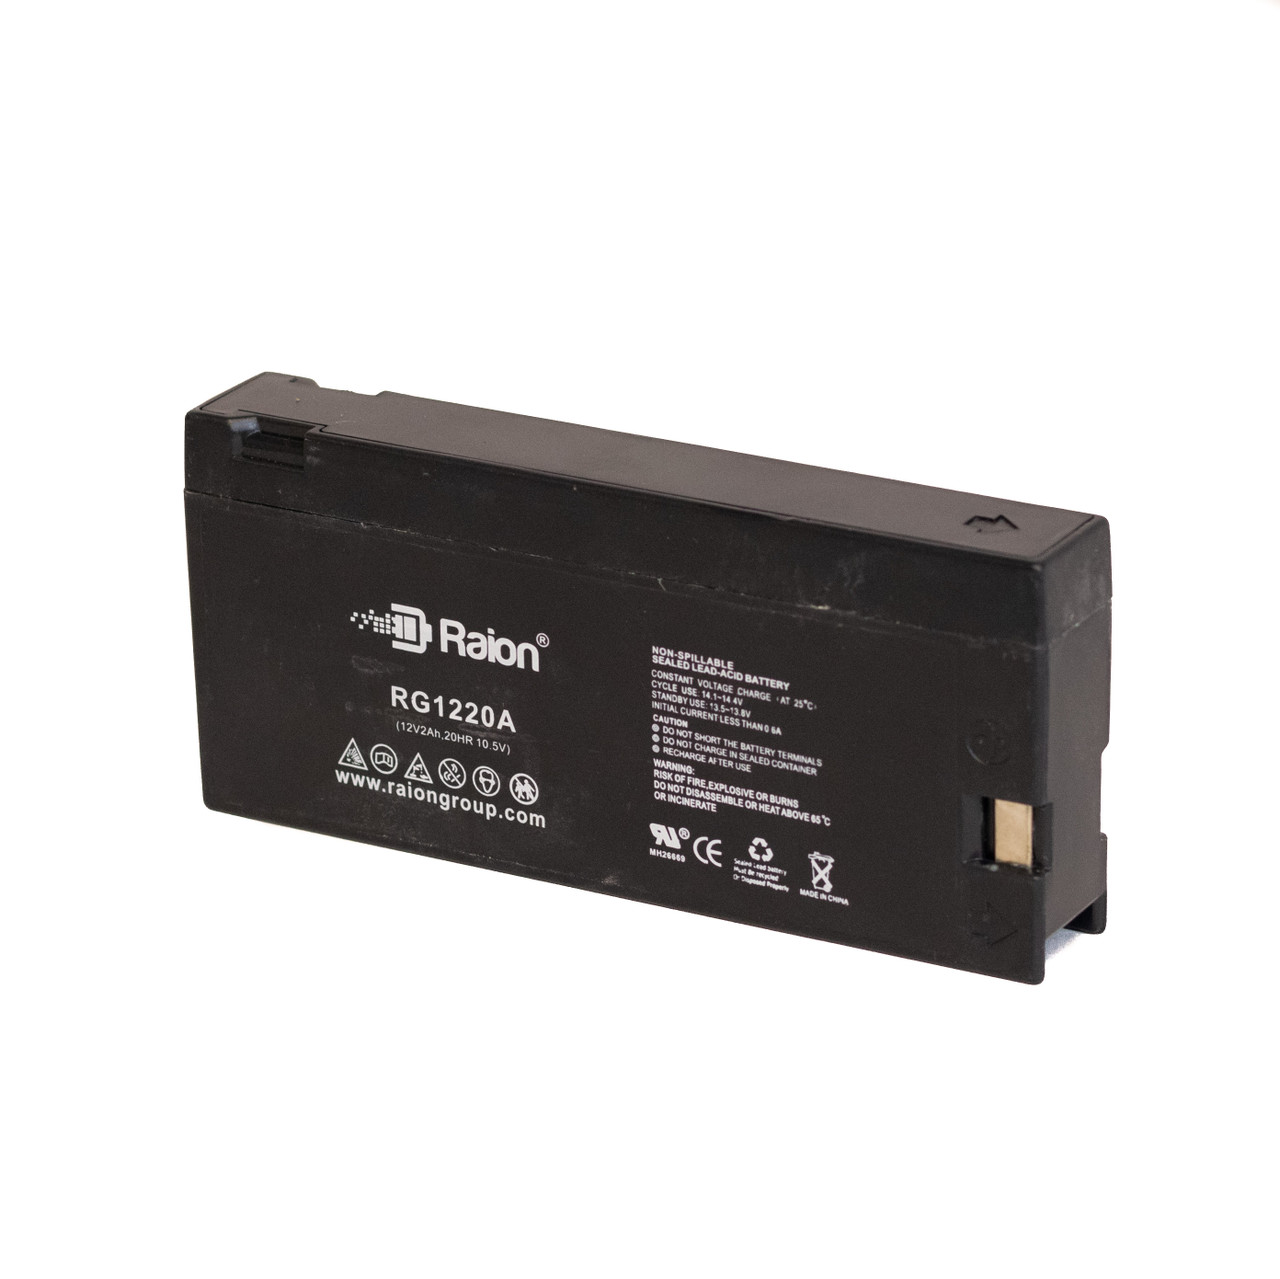 Raion Power RG1220A Replacement Battery for General Electric CG-681